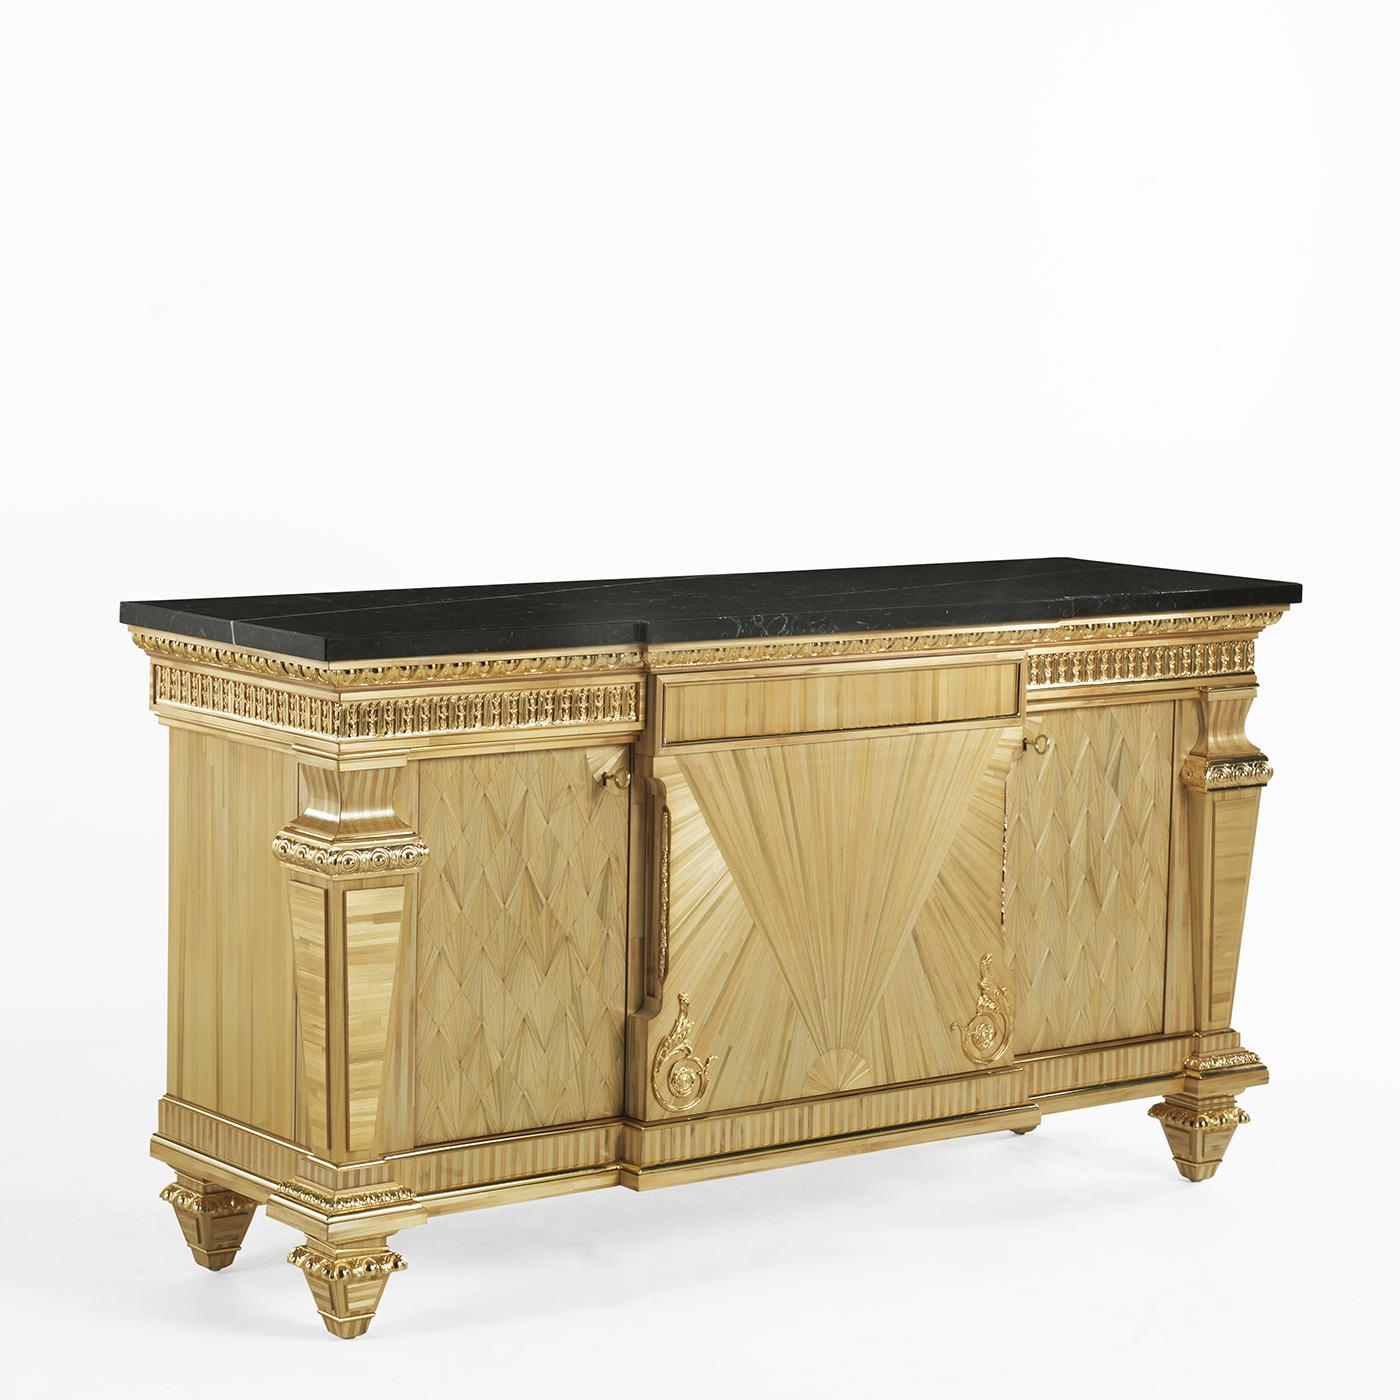 A magnificent piece of functional decor inspired by 19th century neoclassical style, this sideboard will be a precious and sophisticated addition to a classic home. The structure in wood is veneered throughout with rattan with a natural finish. The